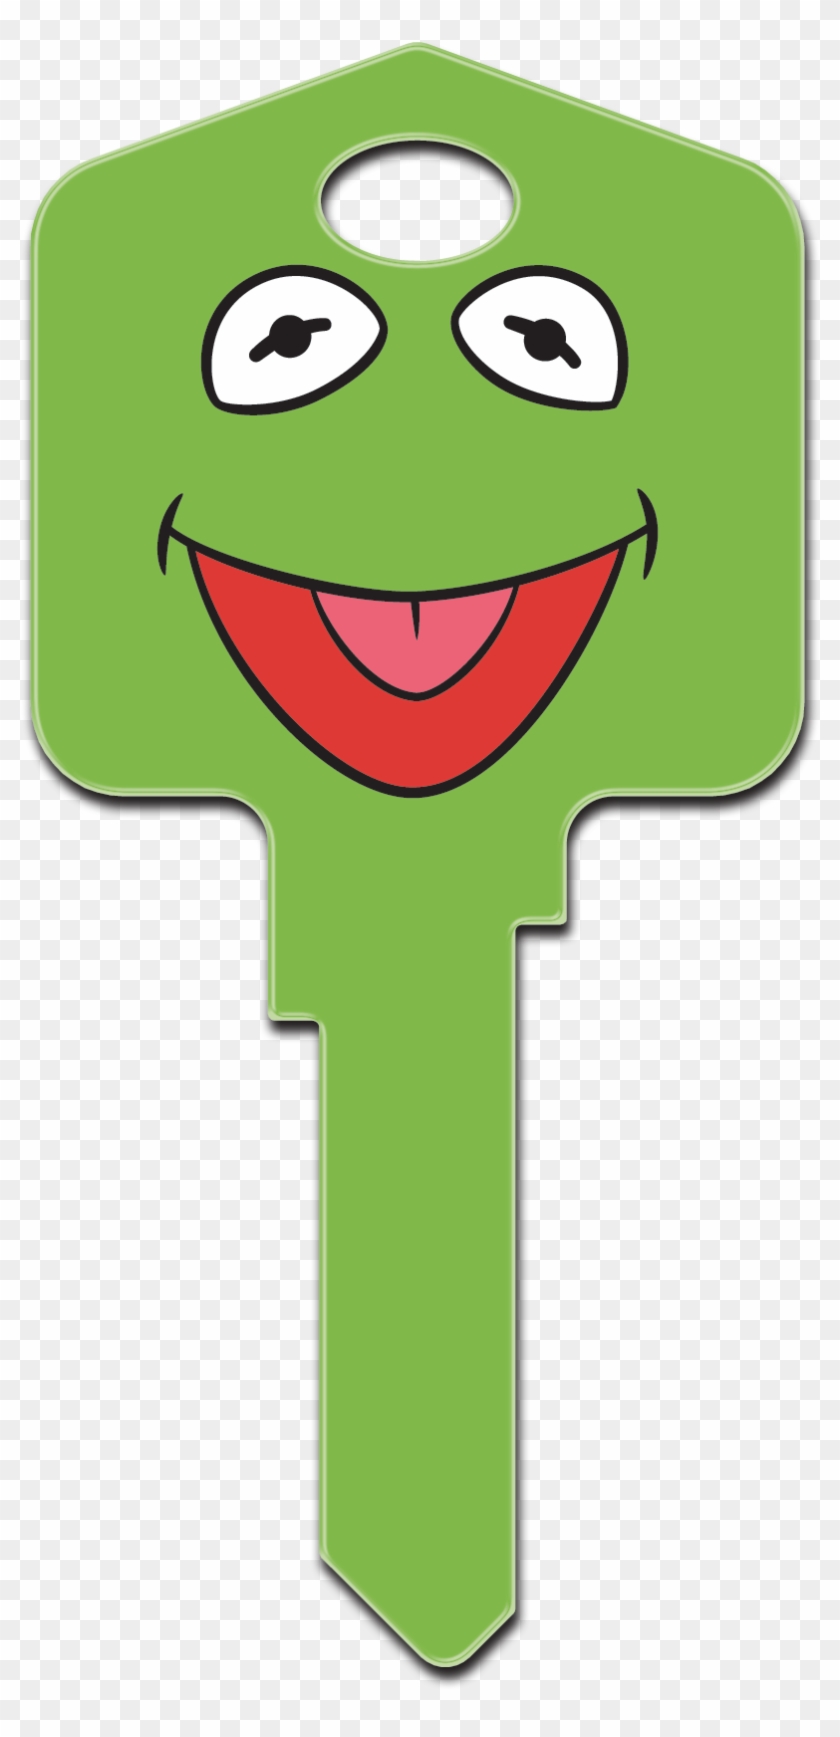 Kermit And Miss Piggy - Kermit The Frog Clipart #139426